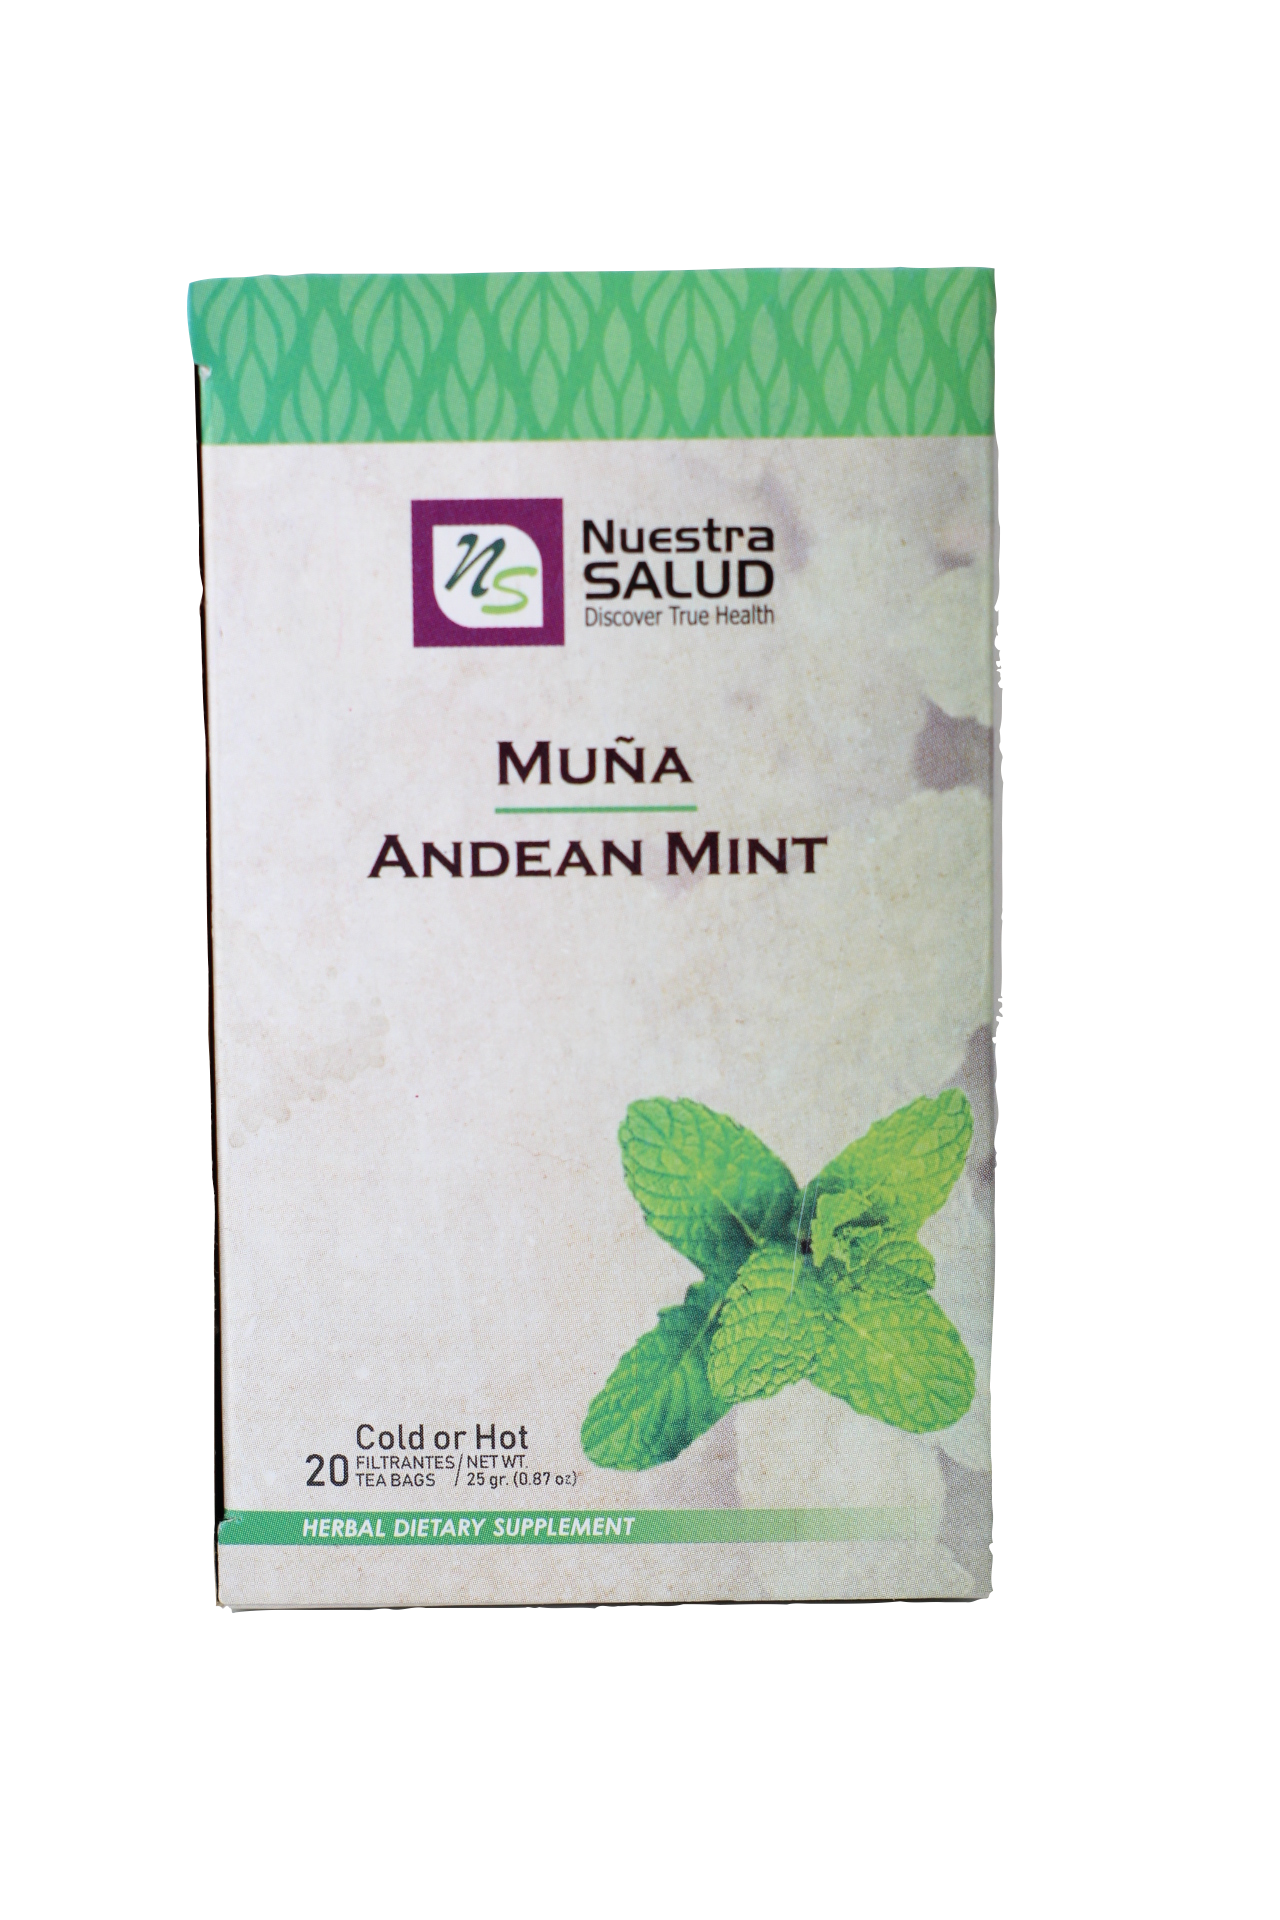  Muña Andean Mint Filter Tea Box (20 Tea bags) by Nuestra Salud sold by NS Herbs Co.